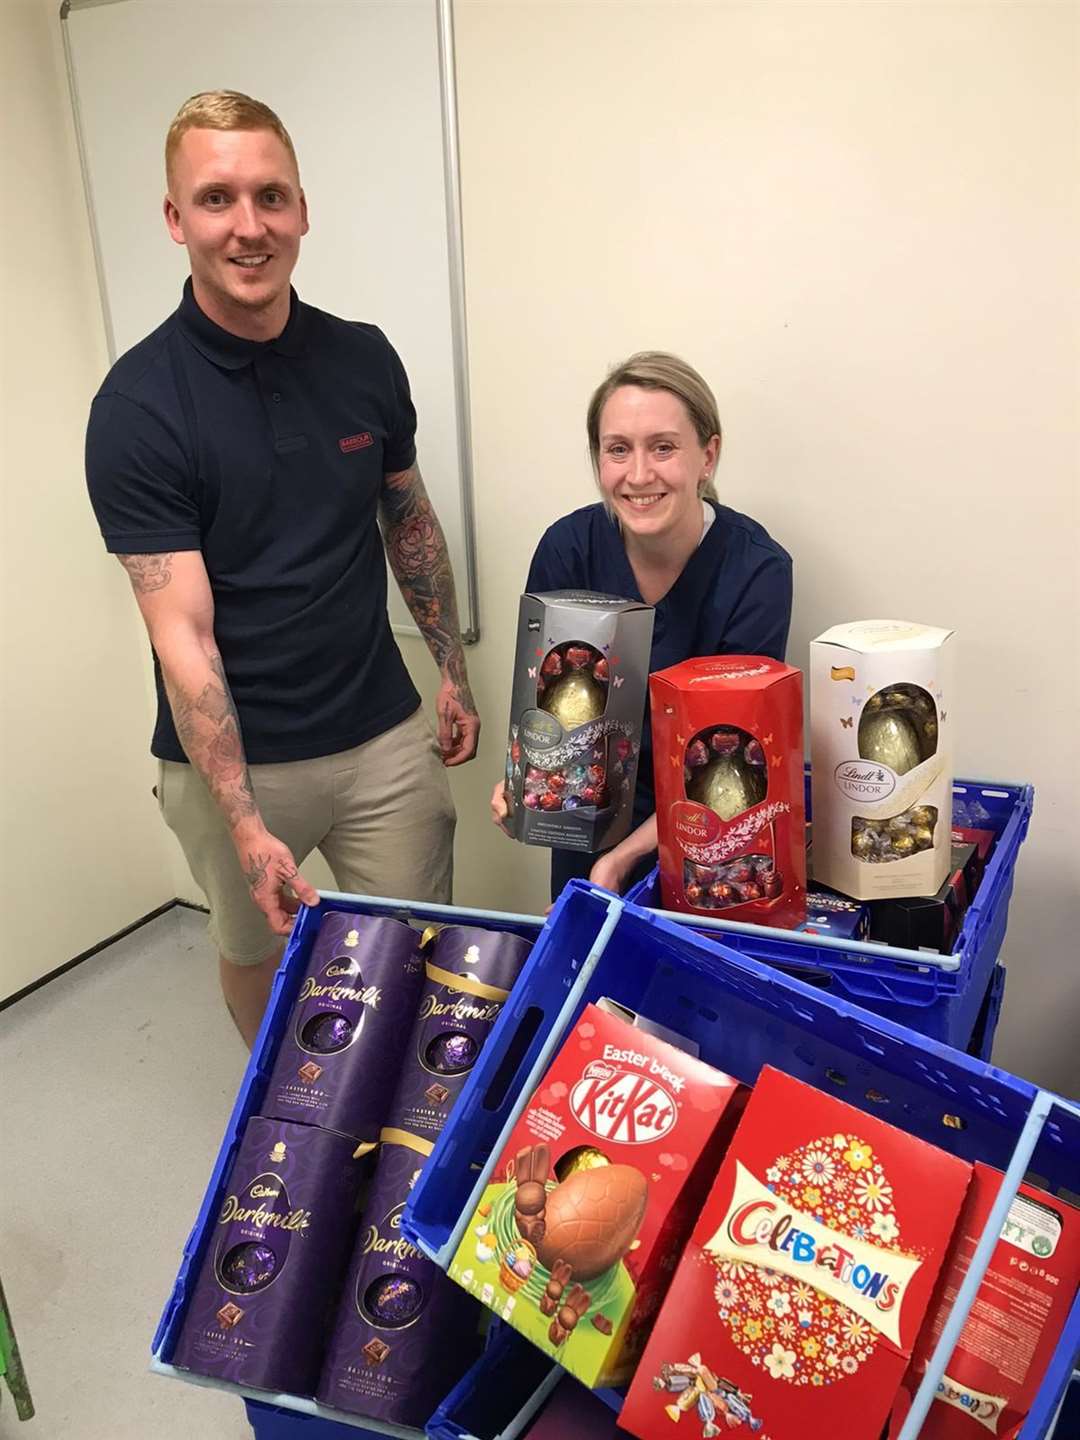 Aspiring Freemason Charlie Miller who gave £350 of Easter eggs to Katie Kimpton of the Intensive Care Unit at William Harvey Hospital in Ashford